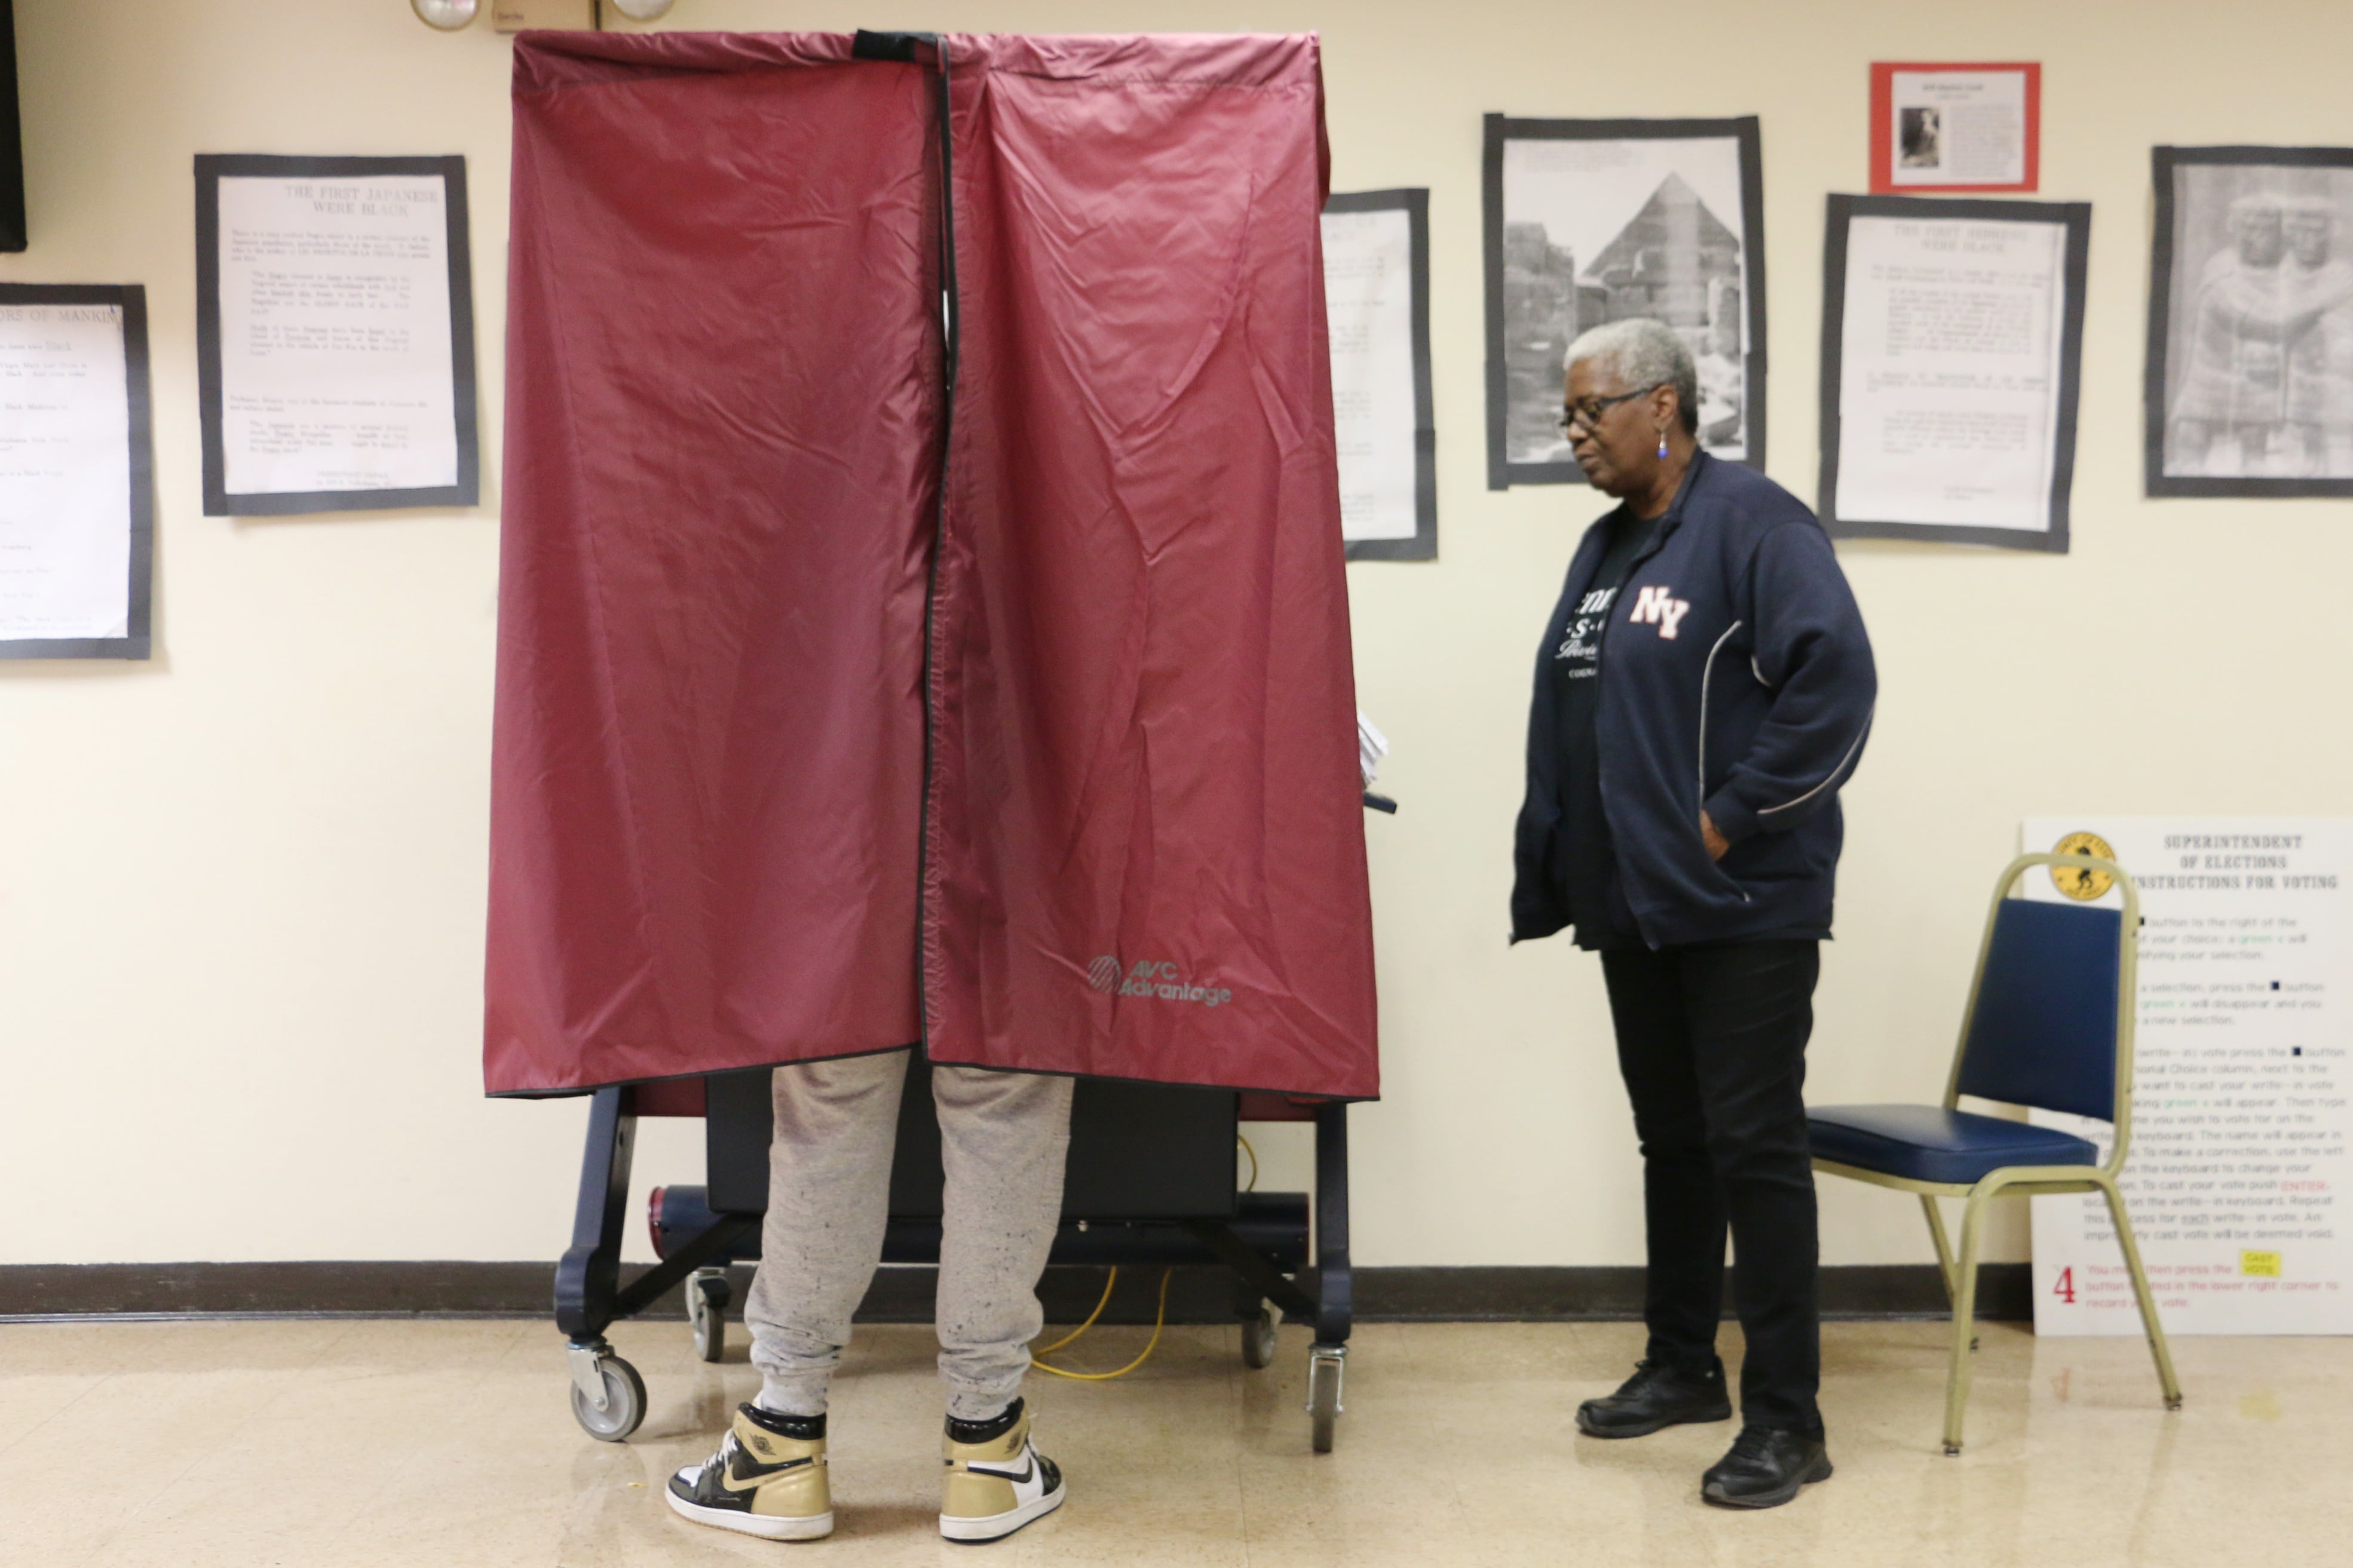 One person stands outside of a voting booth while one person is using the voting booth in a room with large picture frames on the wall in the background.